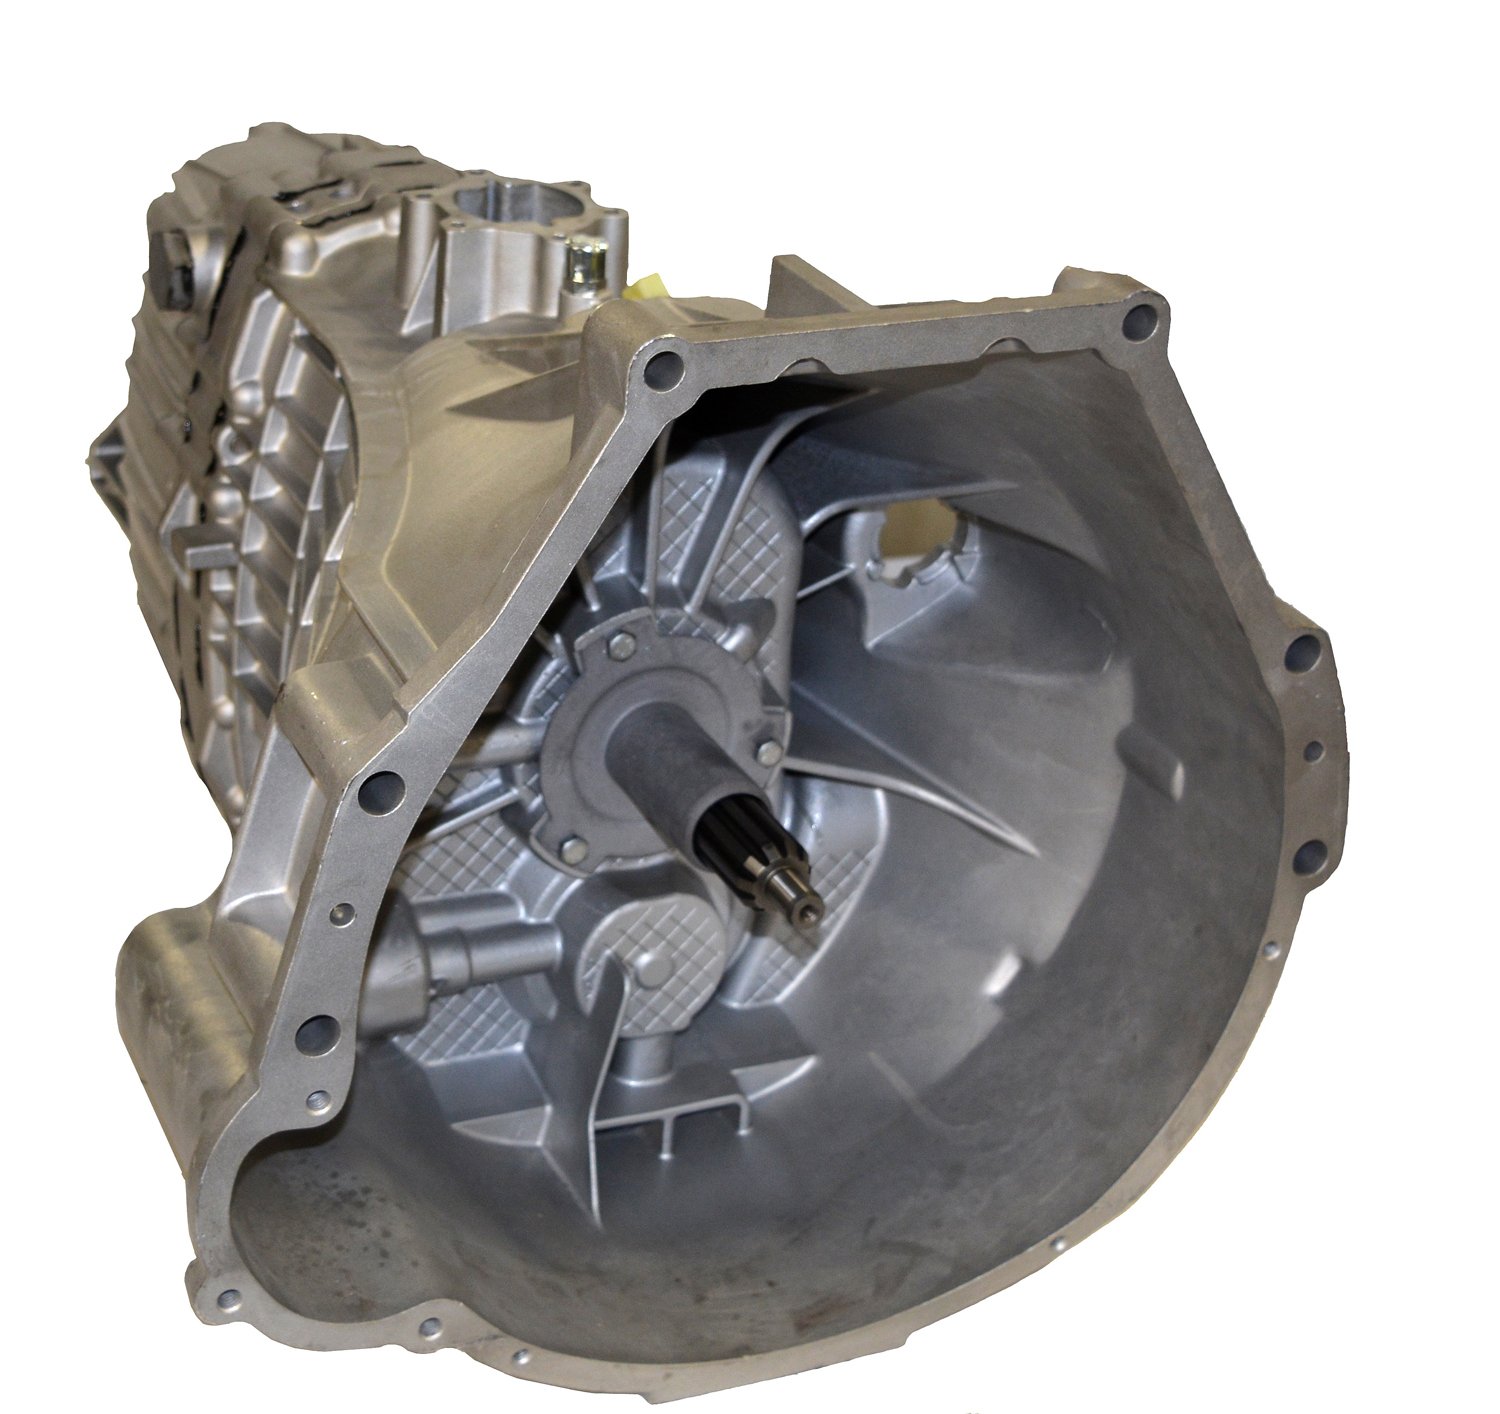 Remanufactured S6-S650F Manual Transmission for Ford 99-00 F-series 7.3L, 2WD, 6 Speed